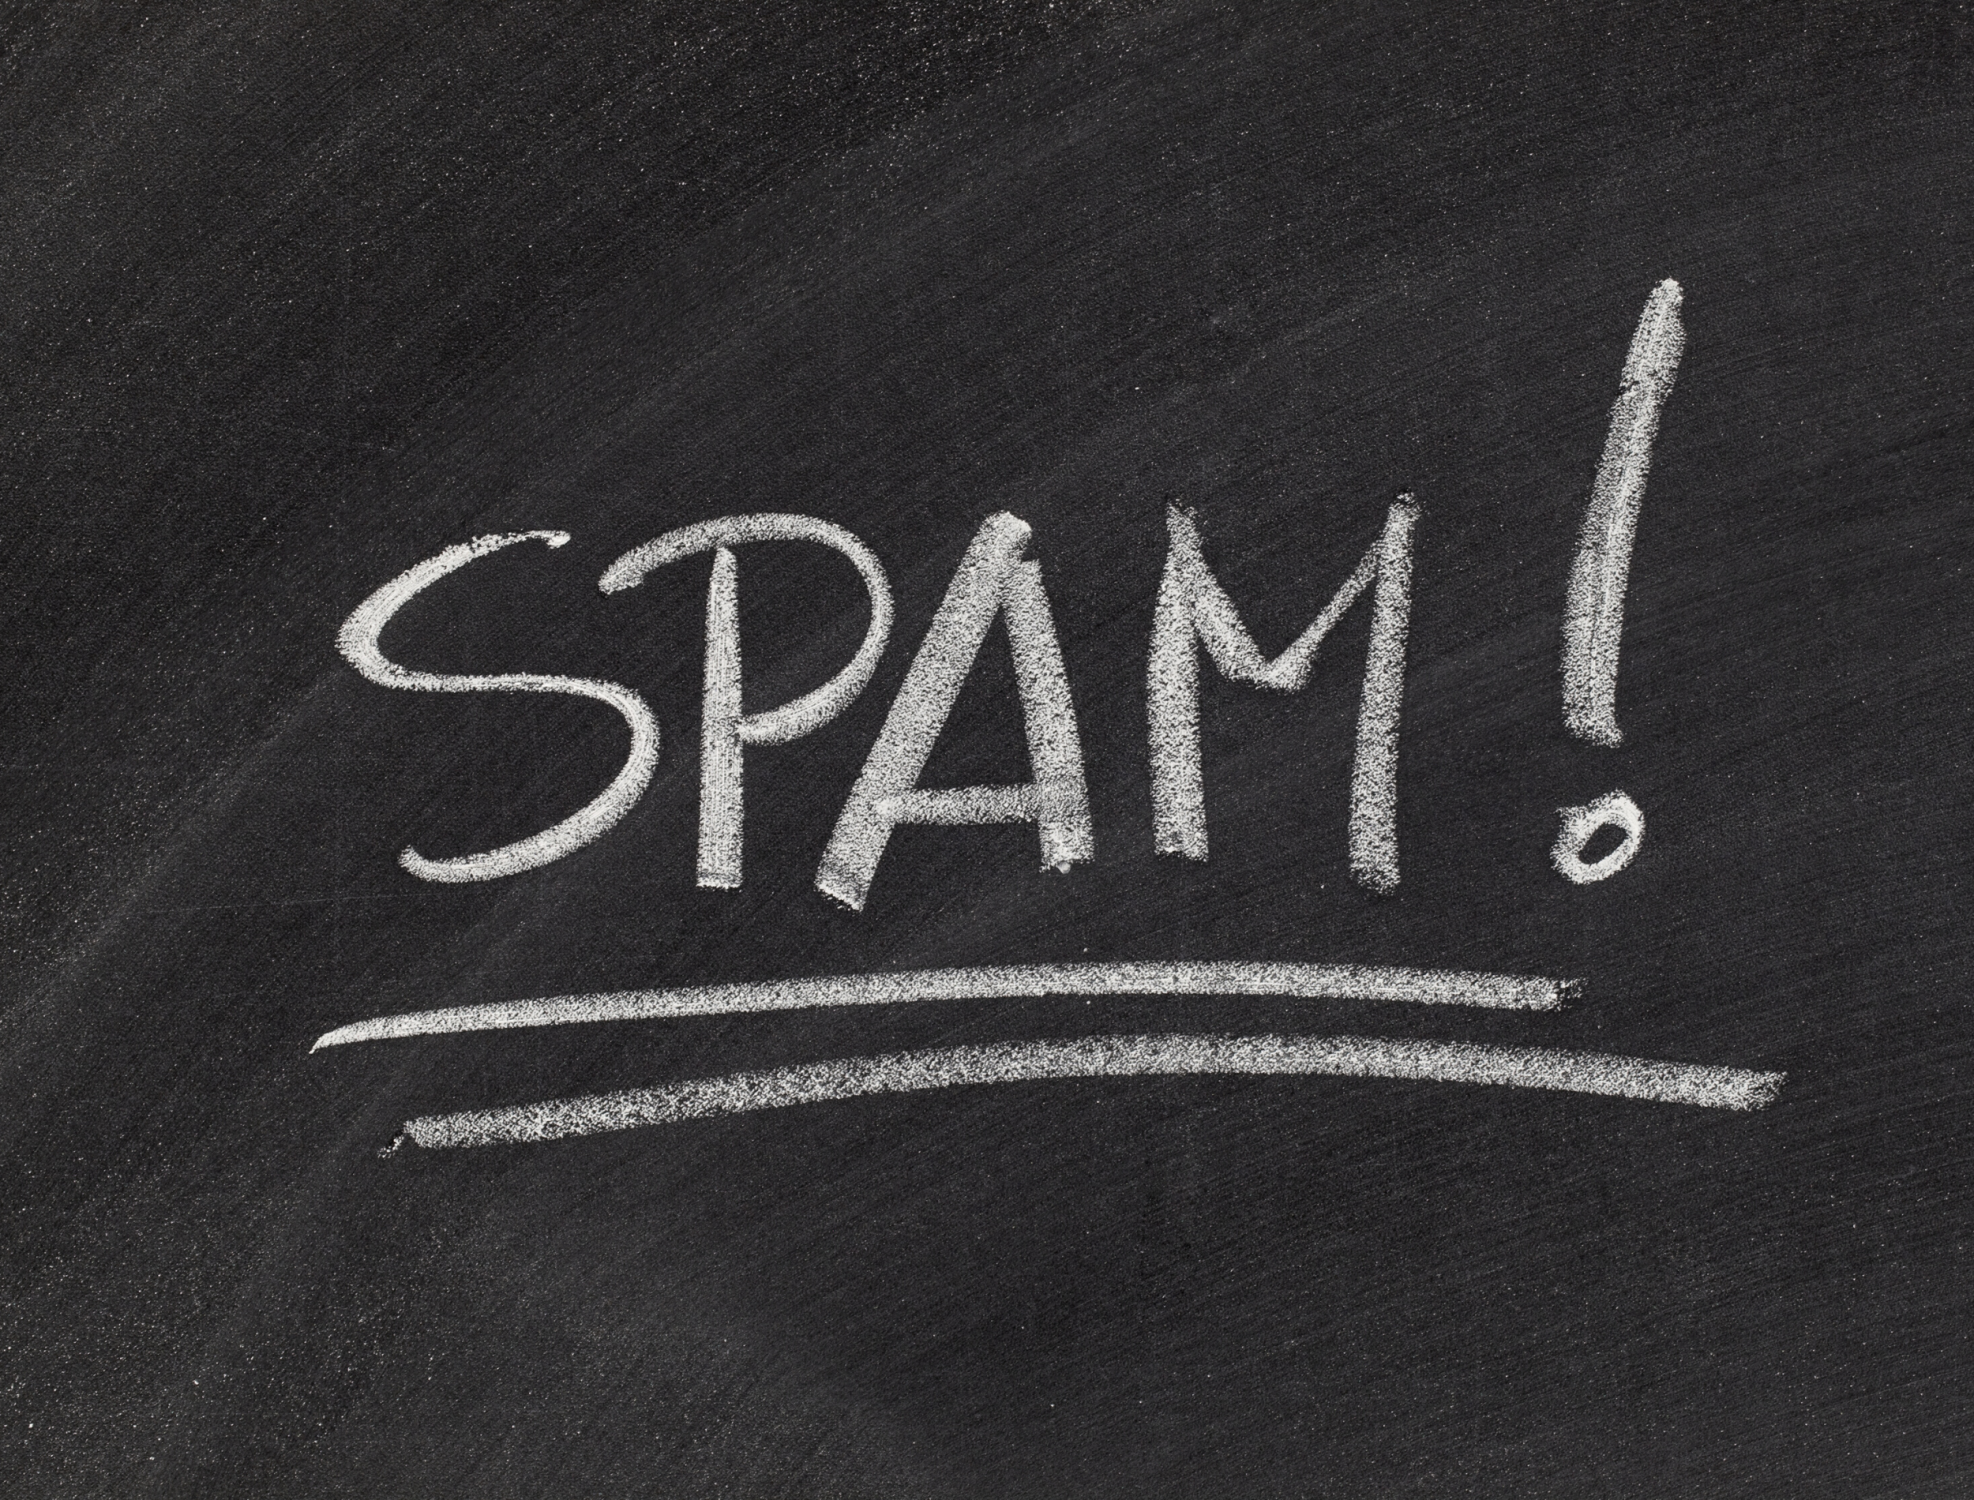 Spam, spam and more spam!